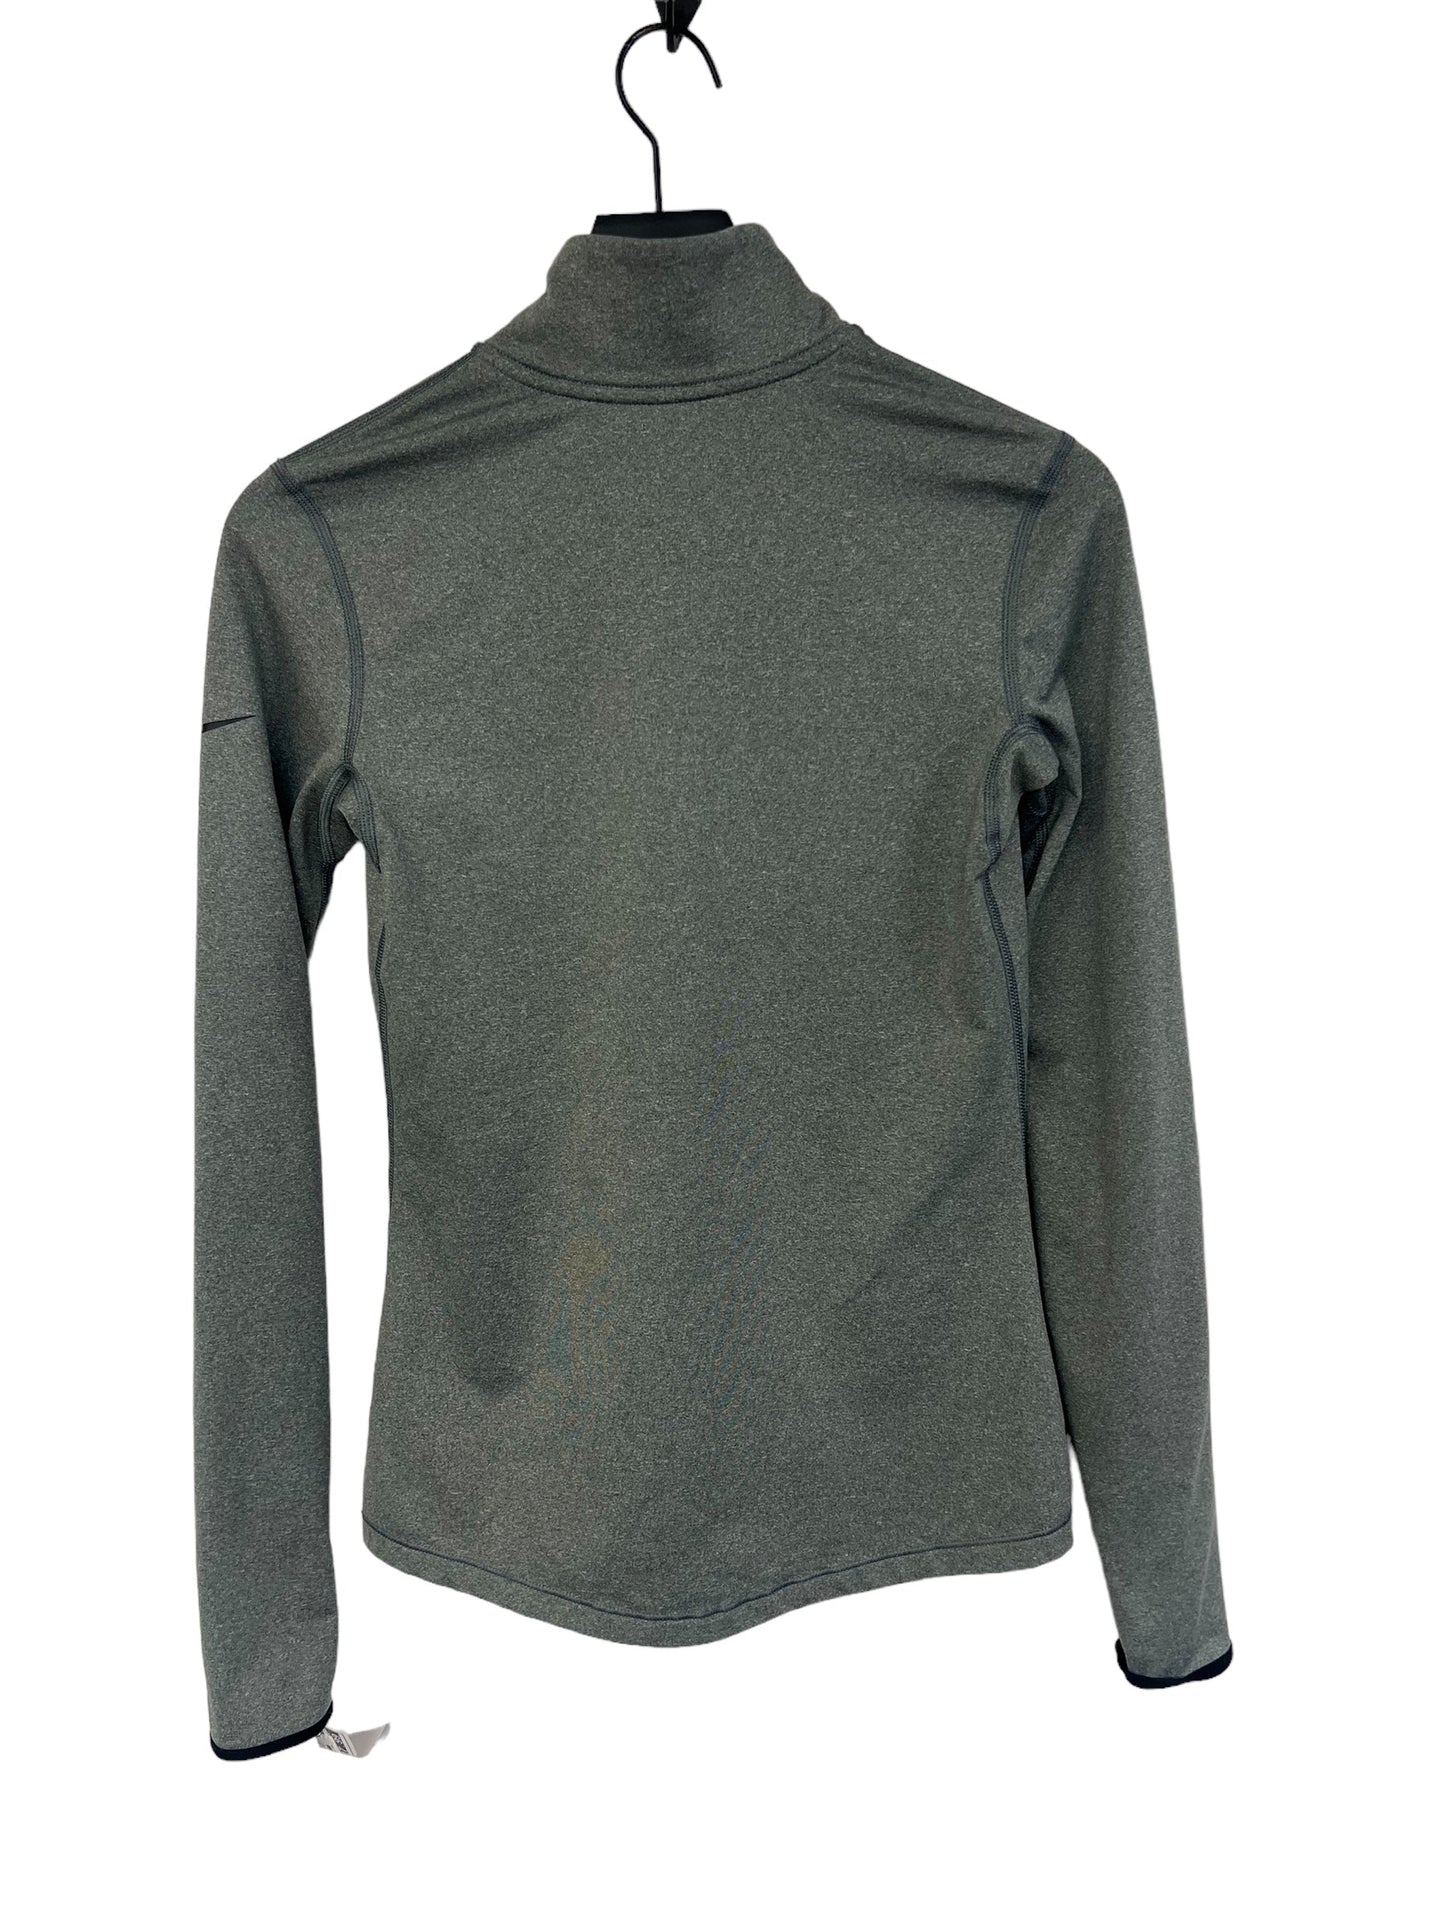 Grey Athletic Top Long Sleeve Collar Nike Apparel, Size M